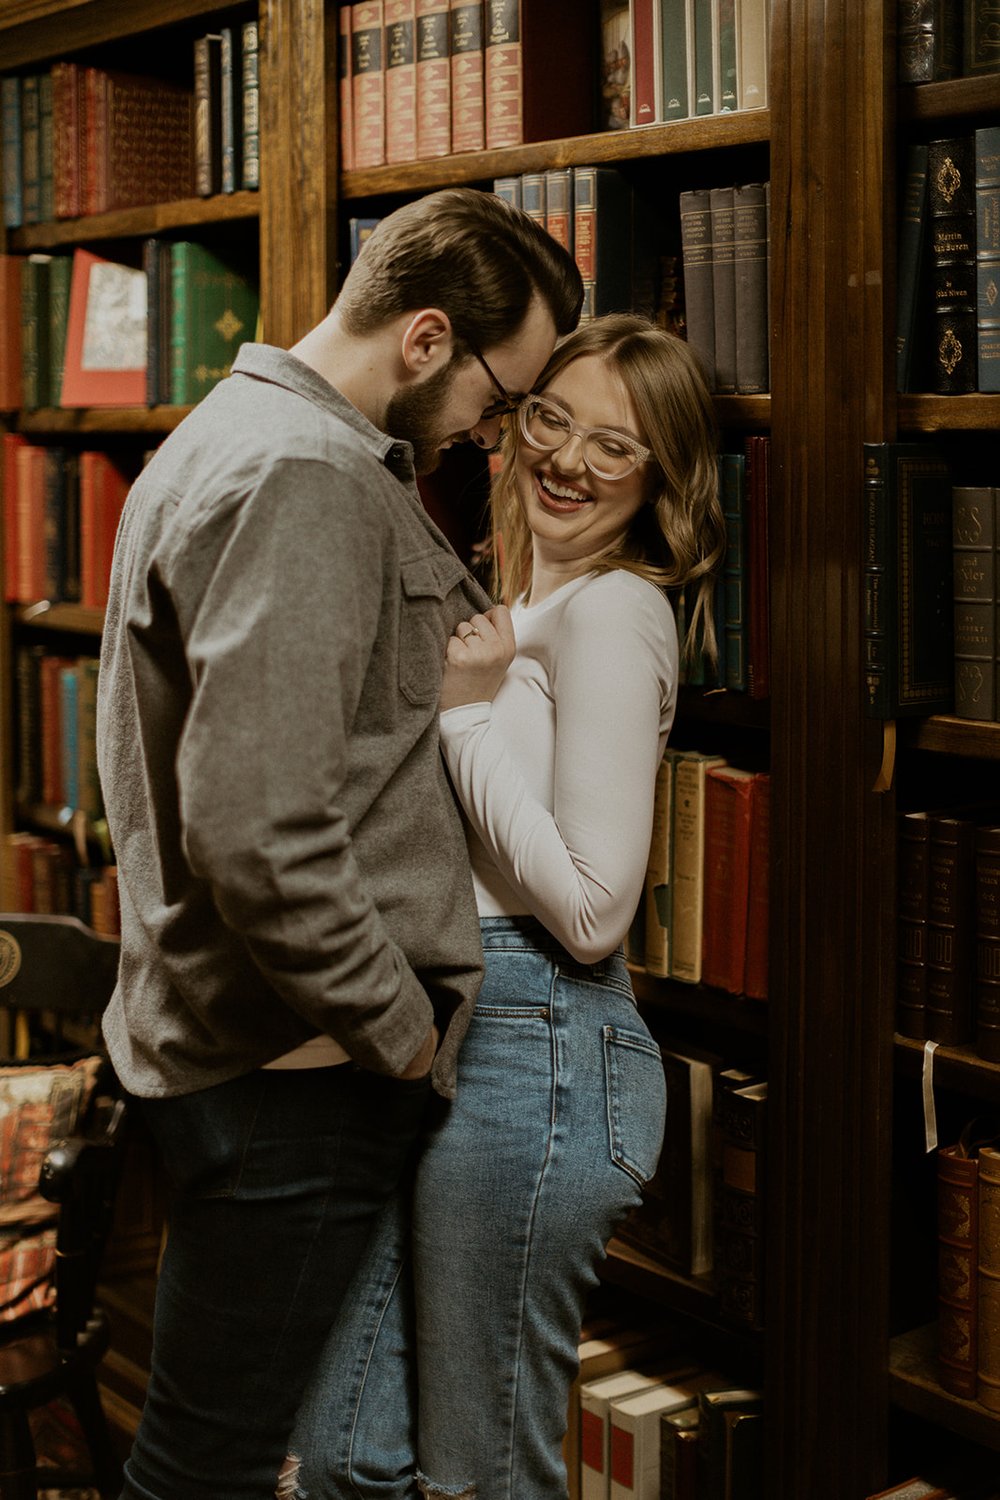 The couple flirt together in the antique book store.